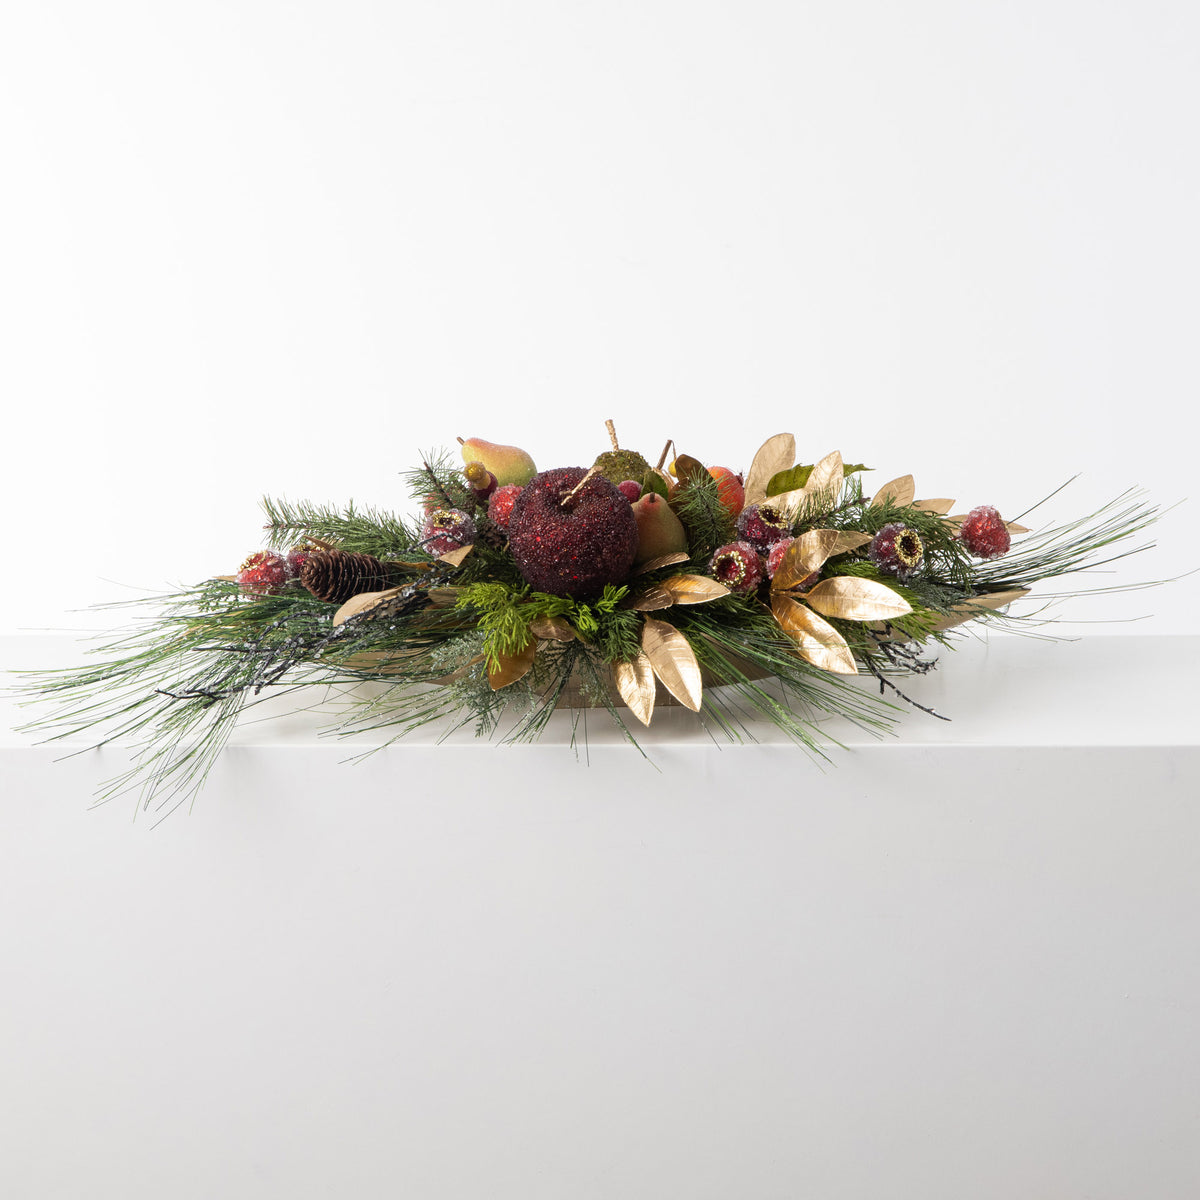 Royal Crystal Beaded Sugared Fruit & Adorned Christmas Arrangement in ...